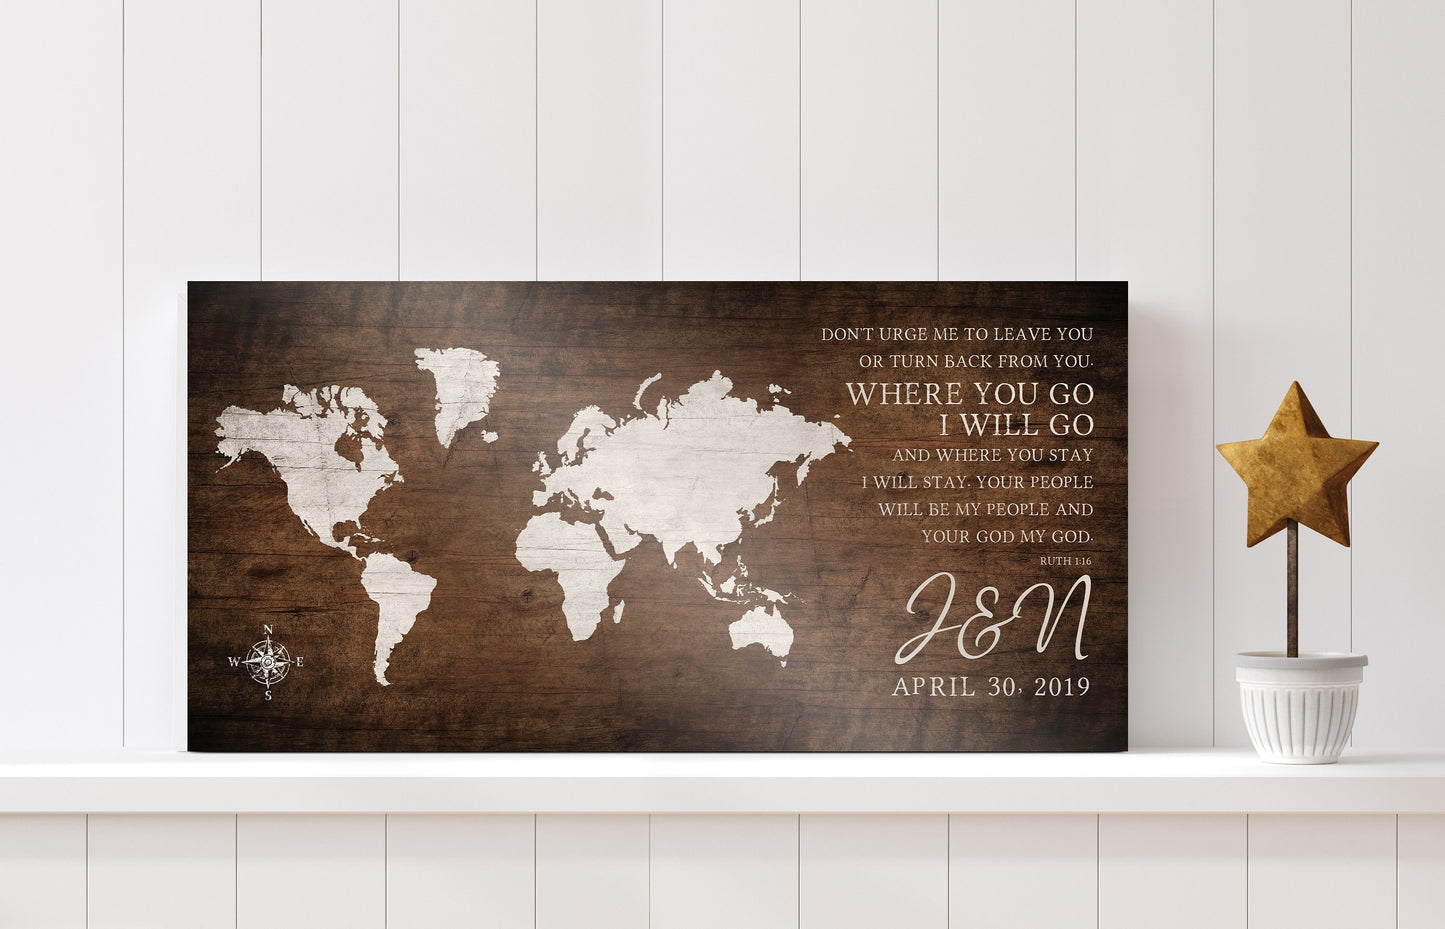 
                  
                    Personalized Couple's Wood Sign - Ruth 1:16 Wall Art - Bedroom - Long Distance Gift for husband - Military spouse - Bible Verse Wedding Gift
                  
                